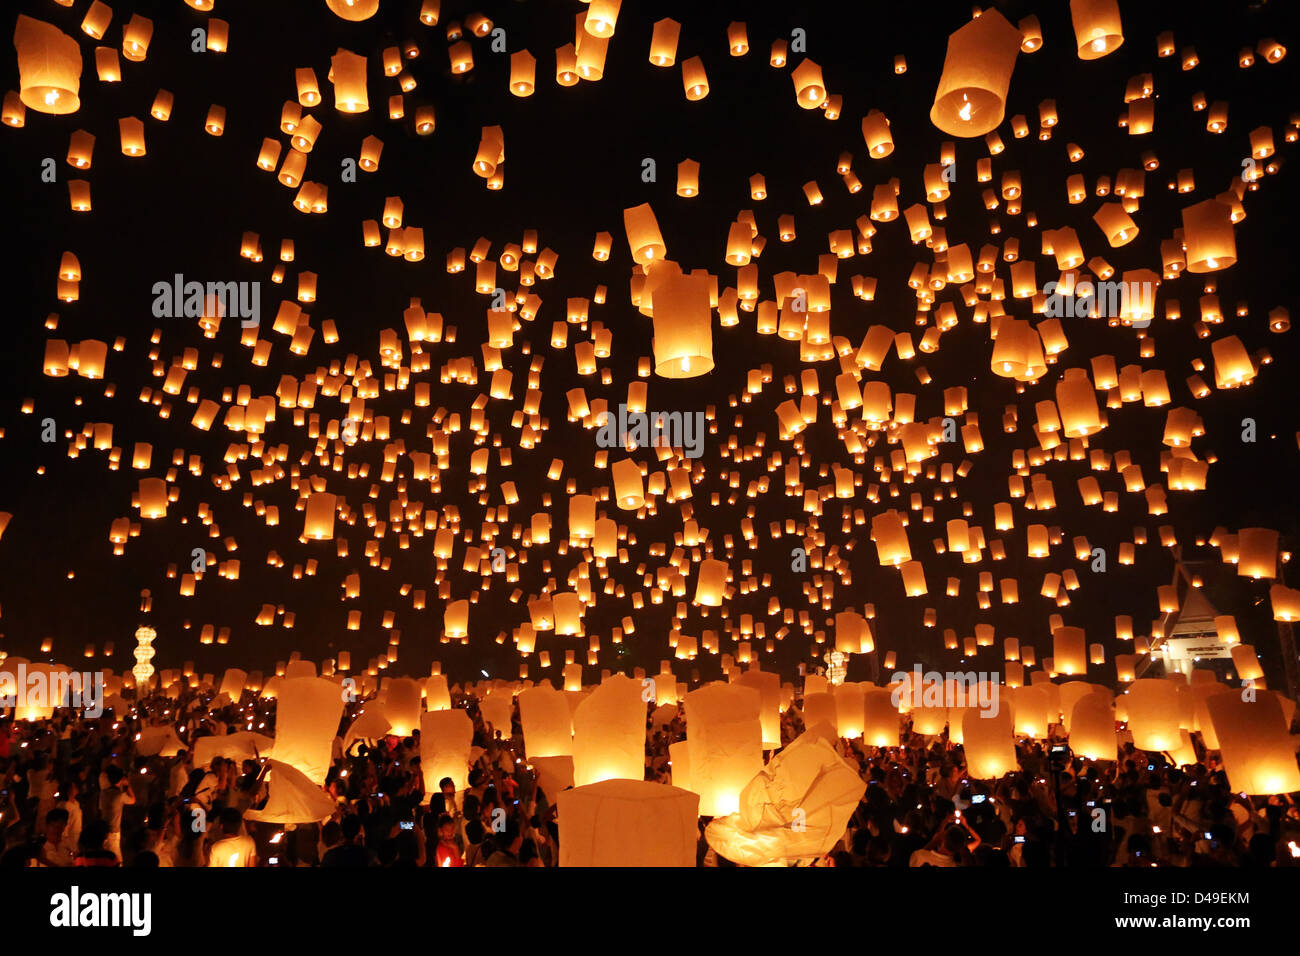 Yee Peng Sansai Floating Lantern Ceremony, part of the Loy Kratong celebrations in homage to Buddha, Maejo, Chiang Mai, Thailand Stock Photo